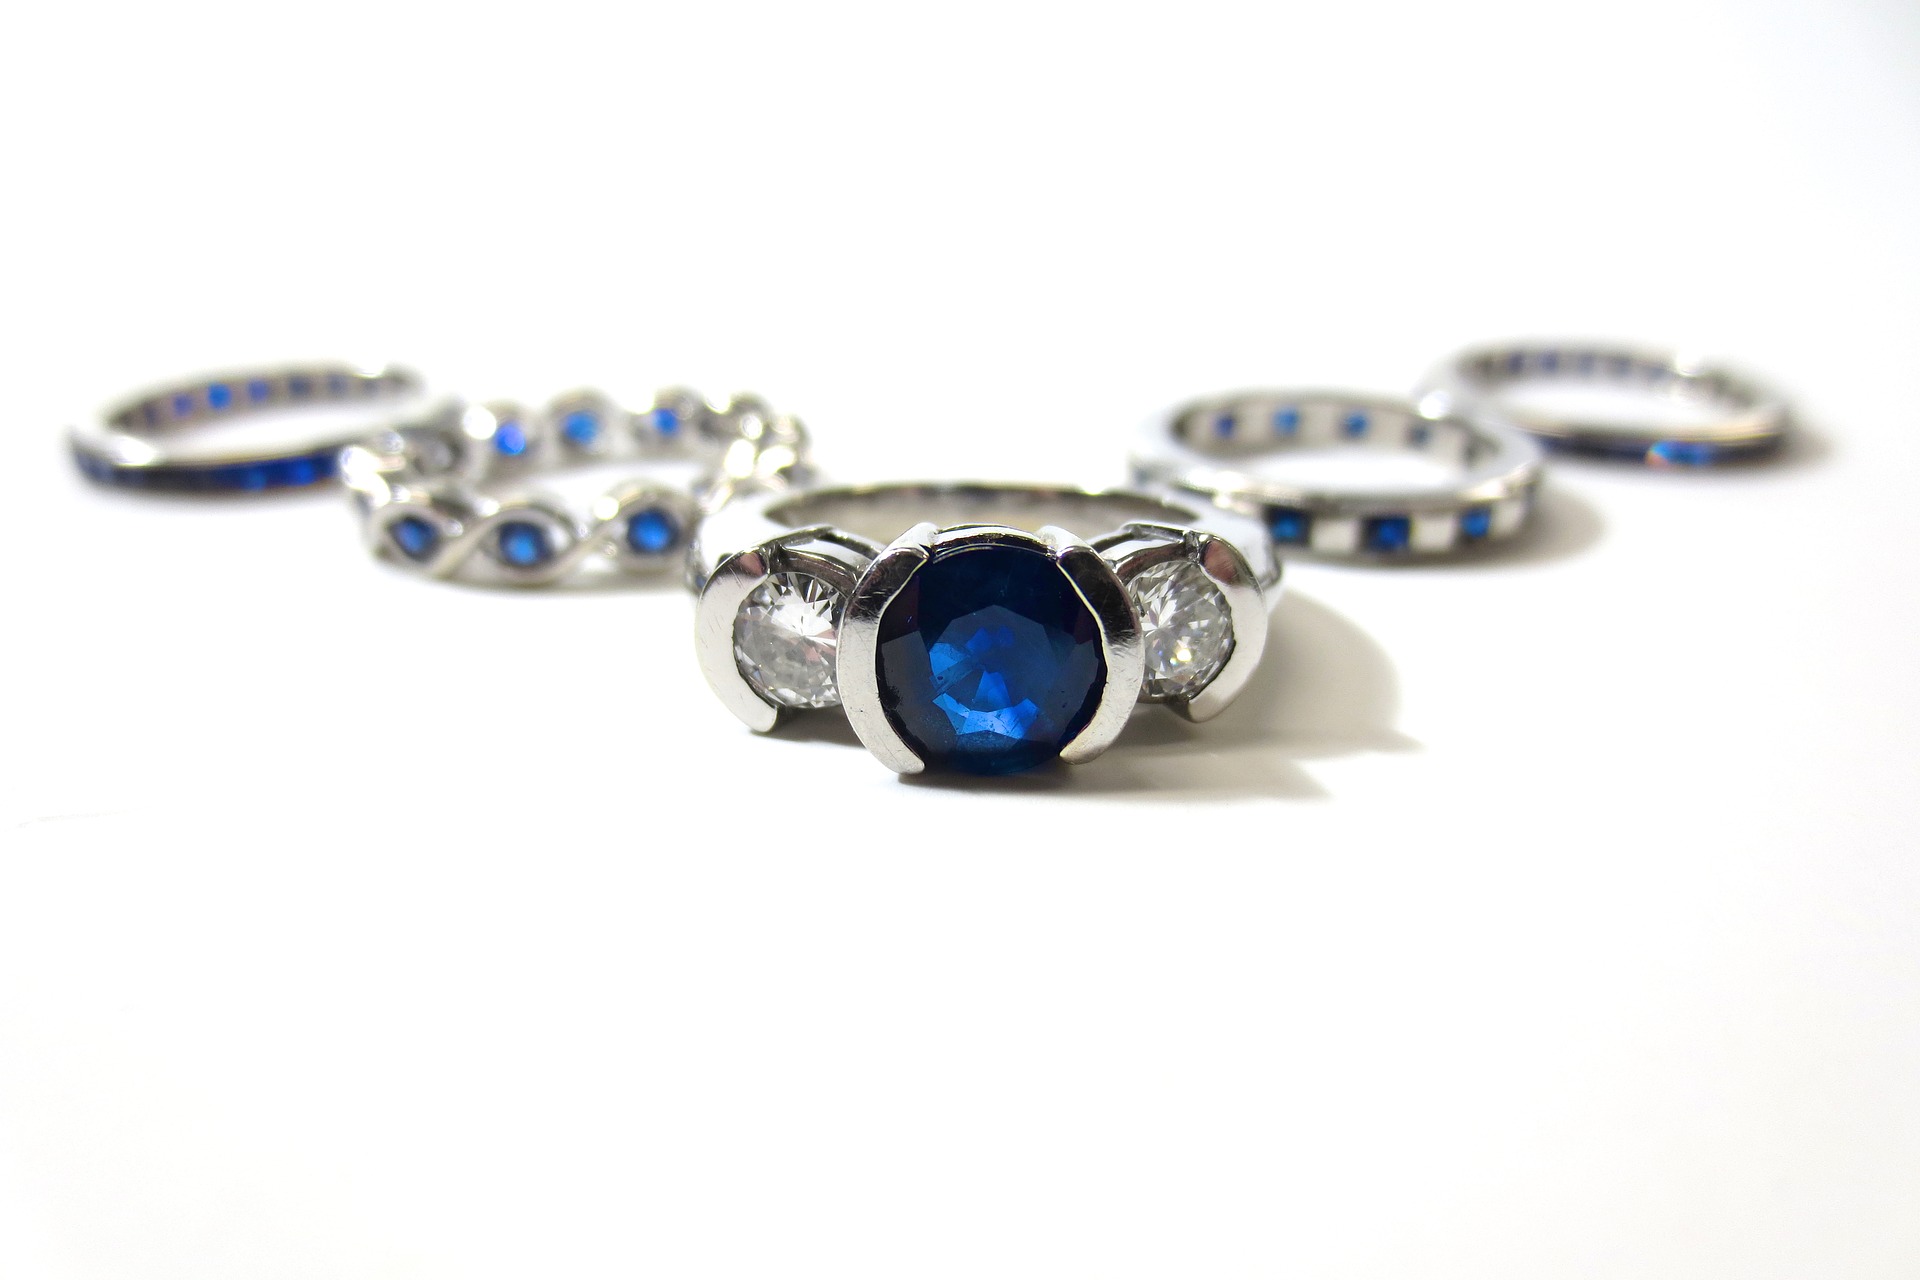 The Blue Hues of the December Birthstones